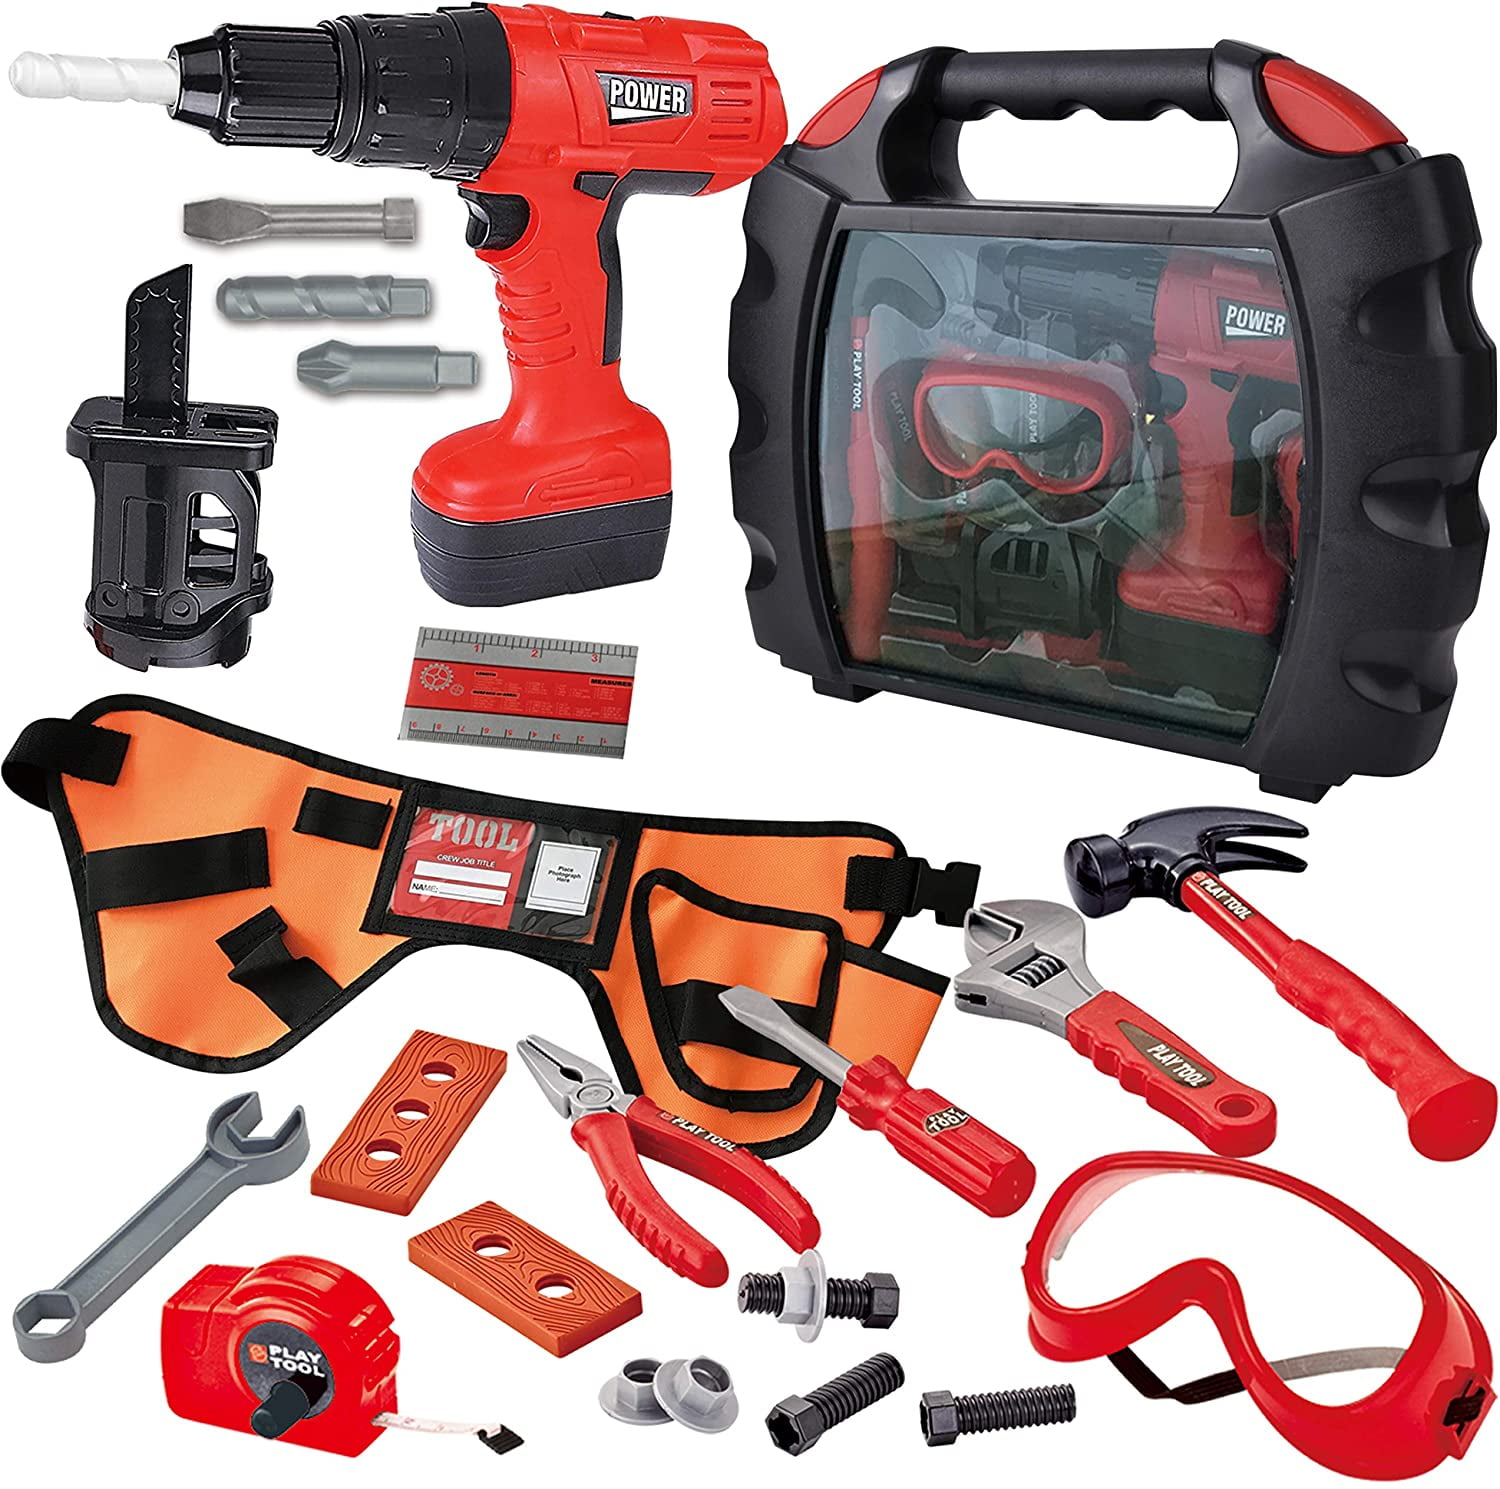 KIDS TOOL SET WITH BELT CONSTRUCTION TOYS WITH ELECTRIC DRILL HAMMER SCREWDRIVER